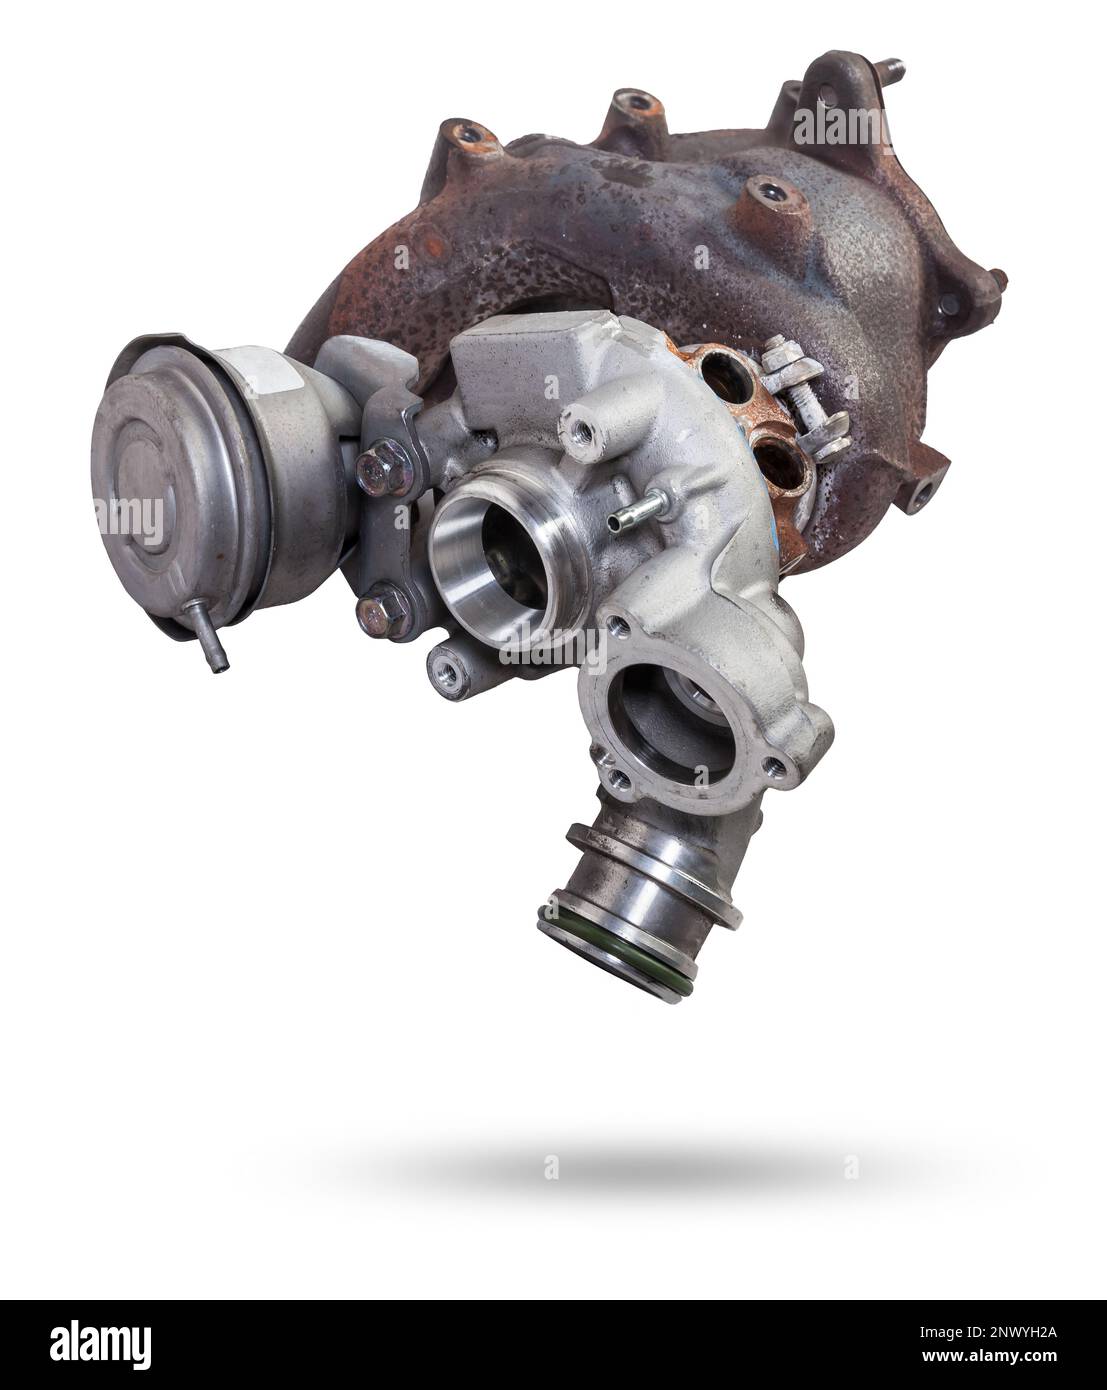 Turbo charger installed for power booster torque drive on white isolated background. Auto service industry for racing. Stock Photo